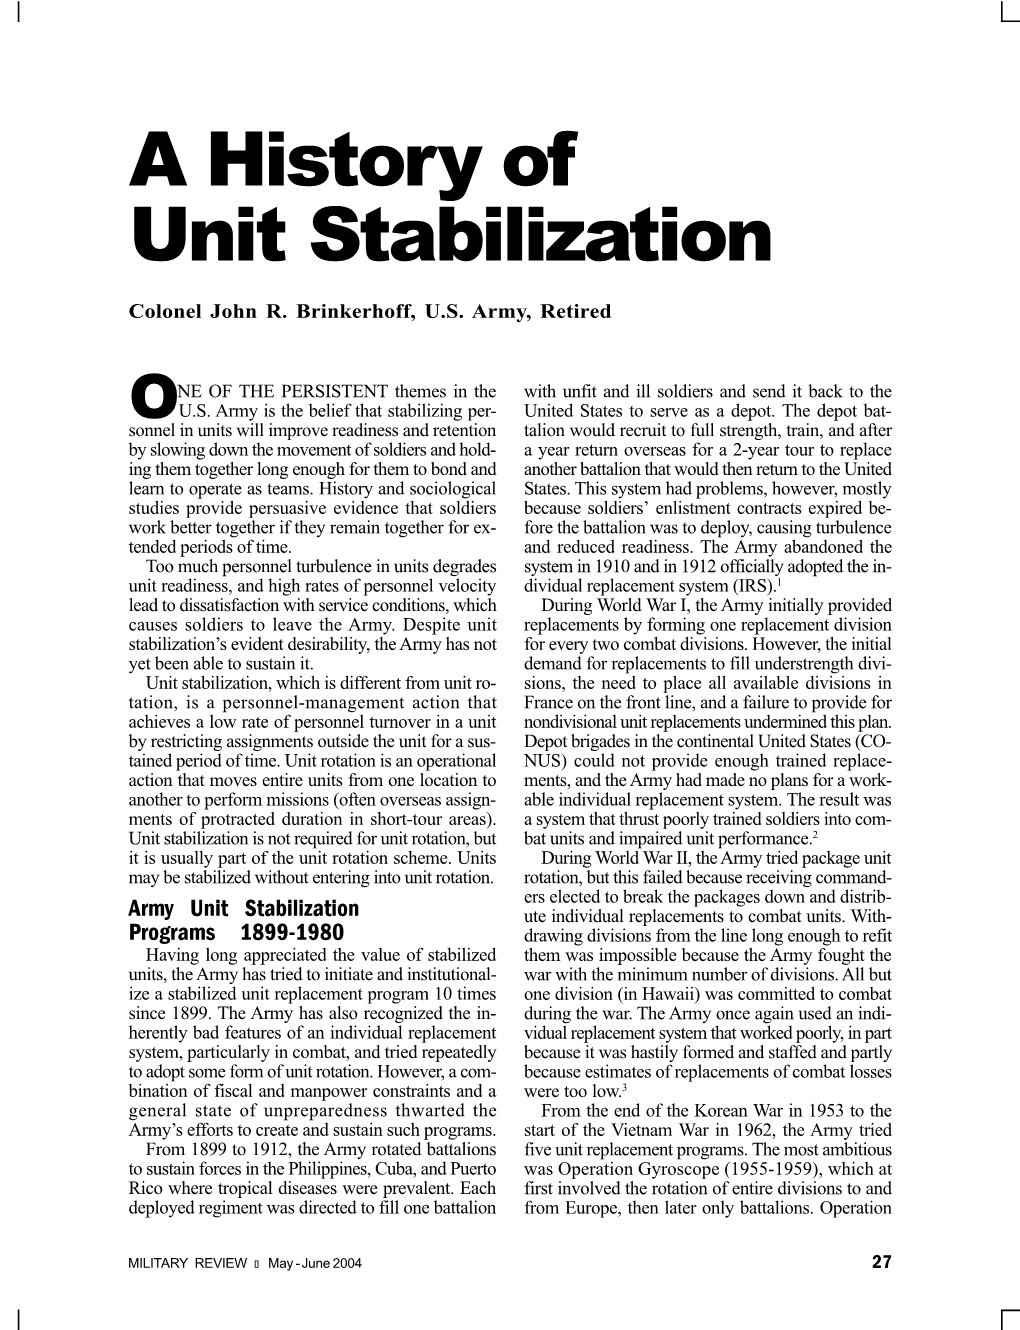 A History of Unit Stabilization